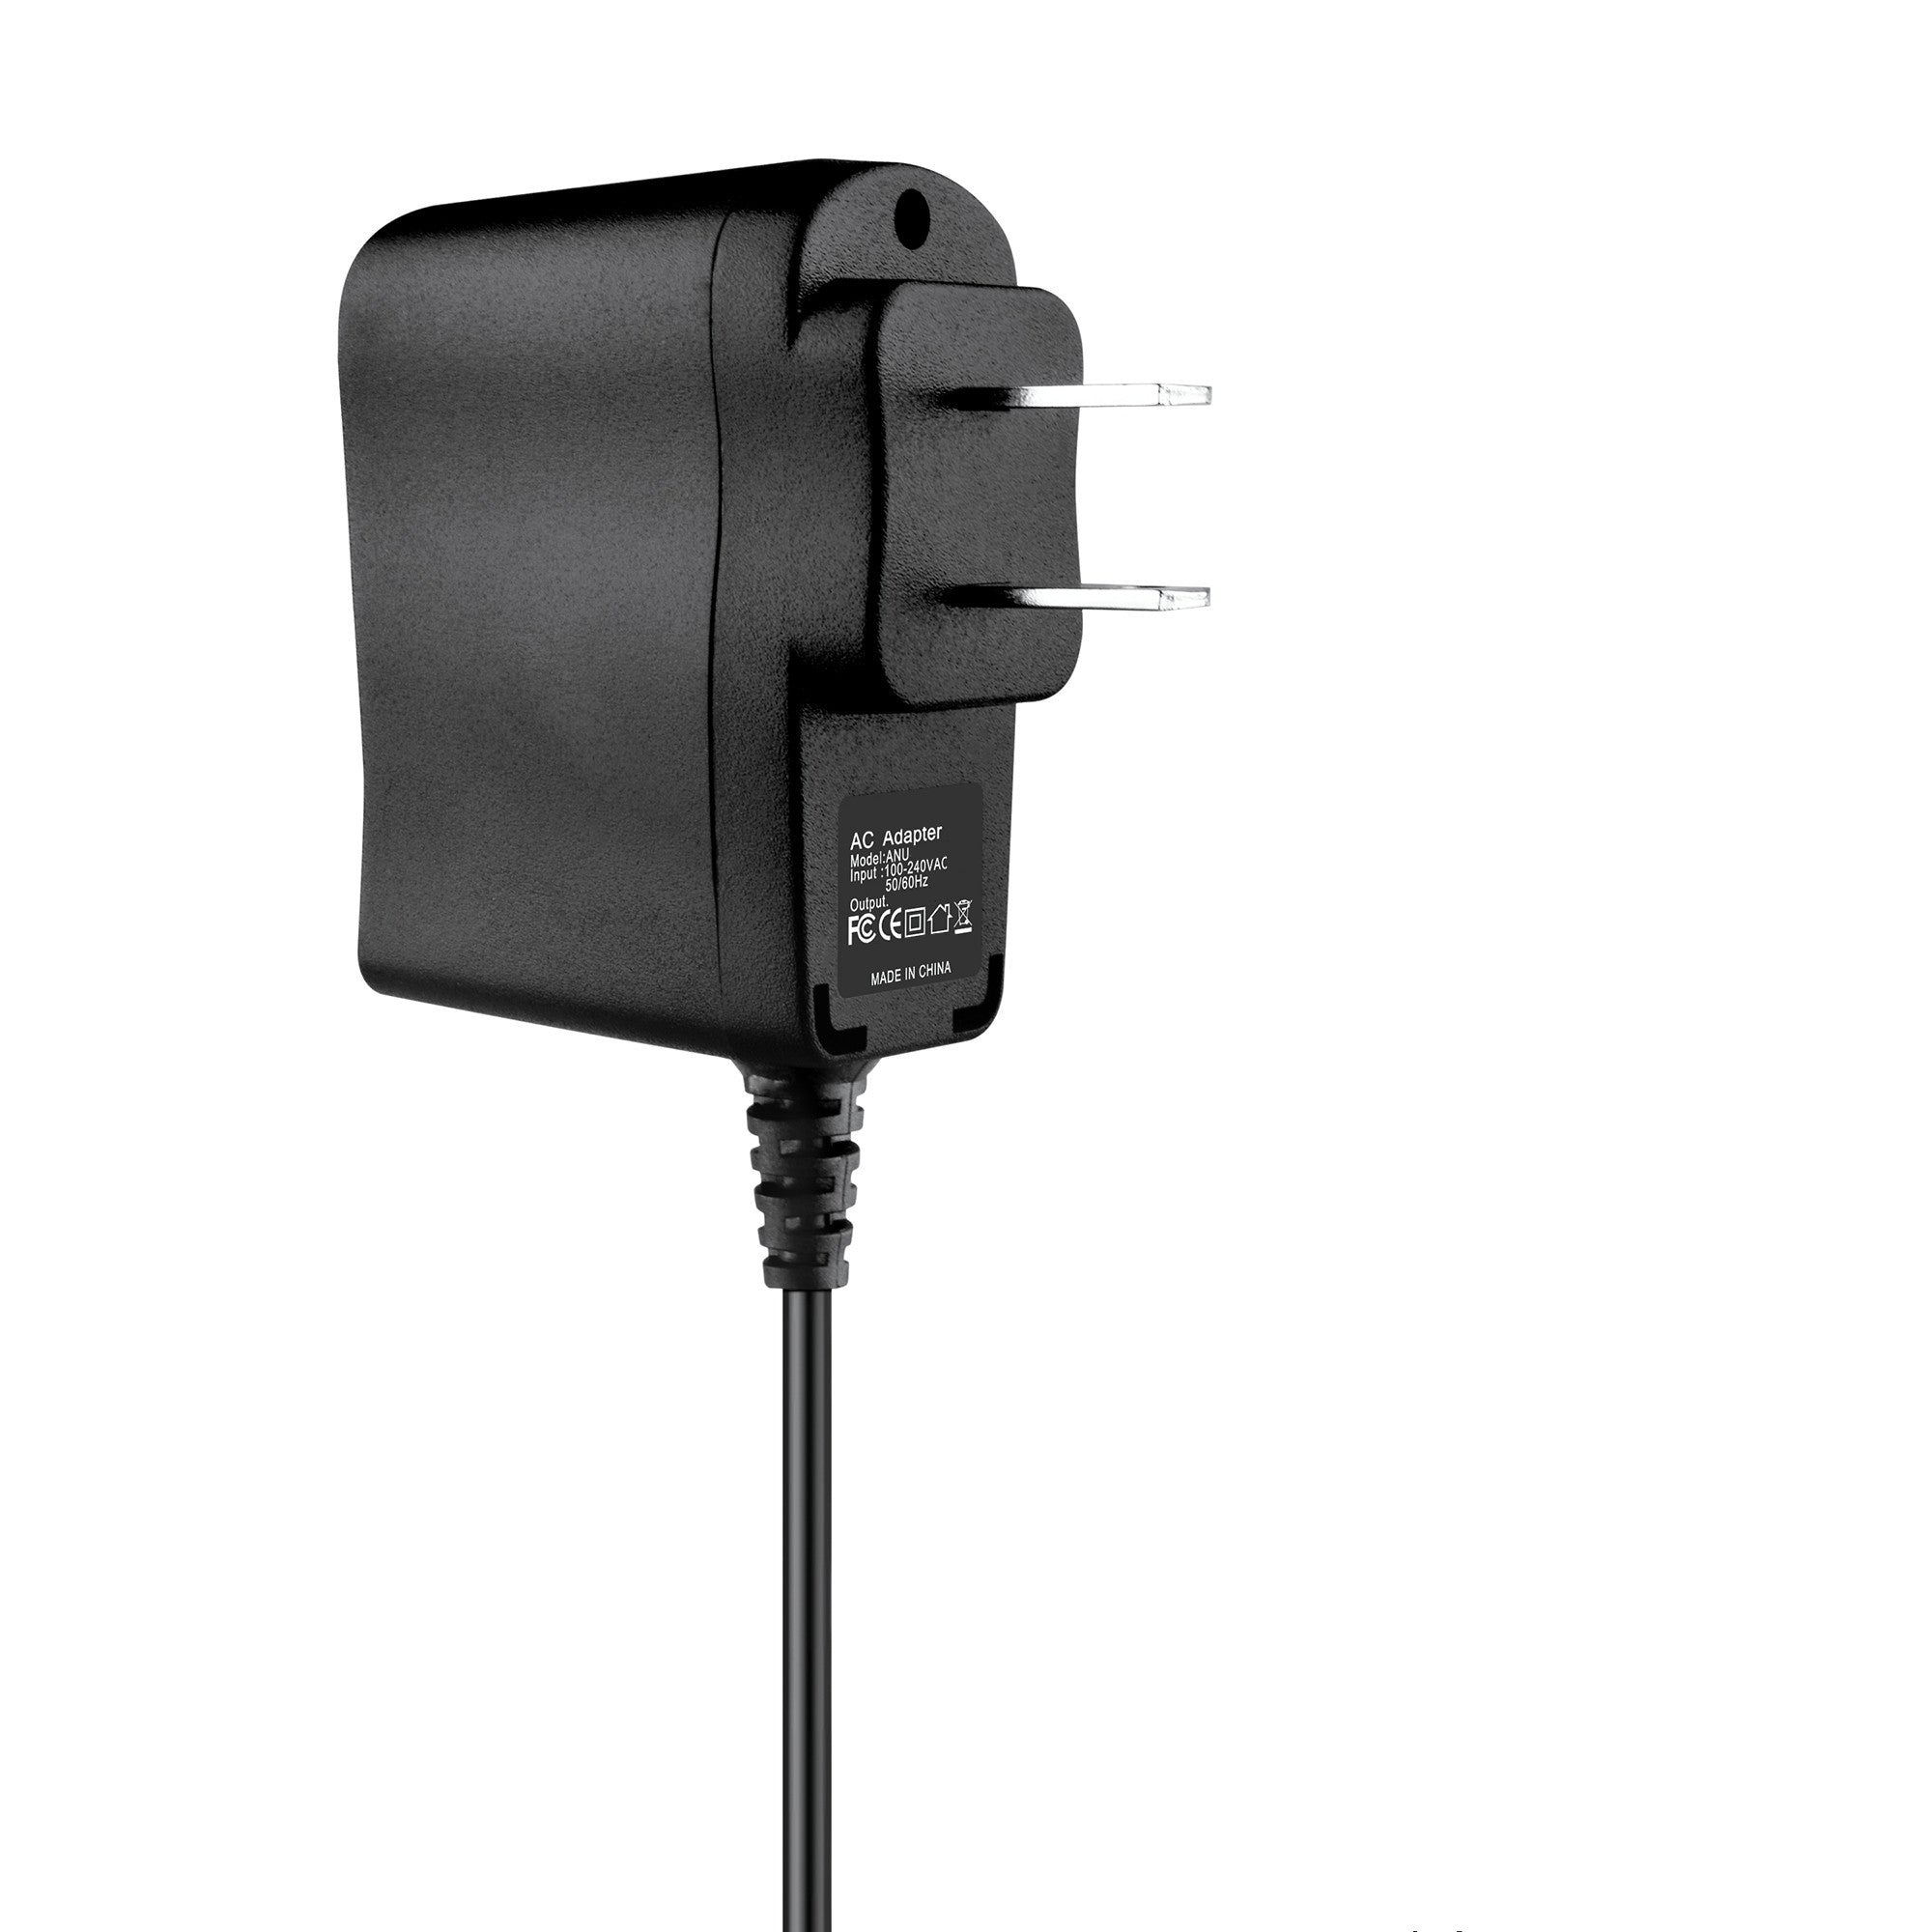 AbleGrid AC Adapter Compatible with iomega Zip Art.-Nr.02000100 FW 1288 FRIWO 5VDC Universal Power